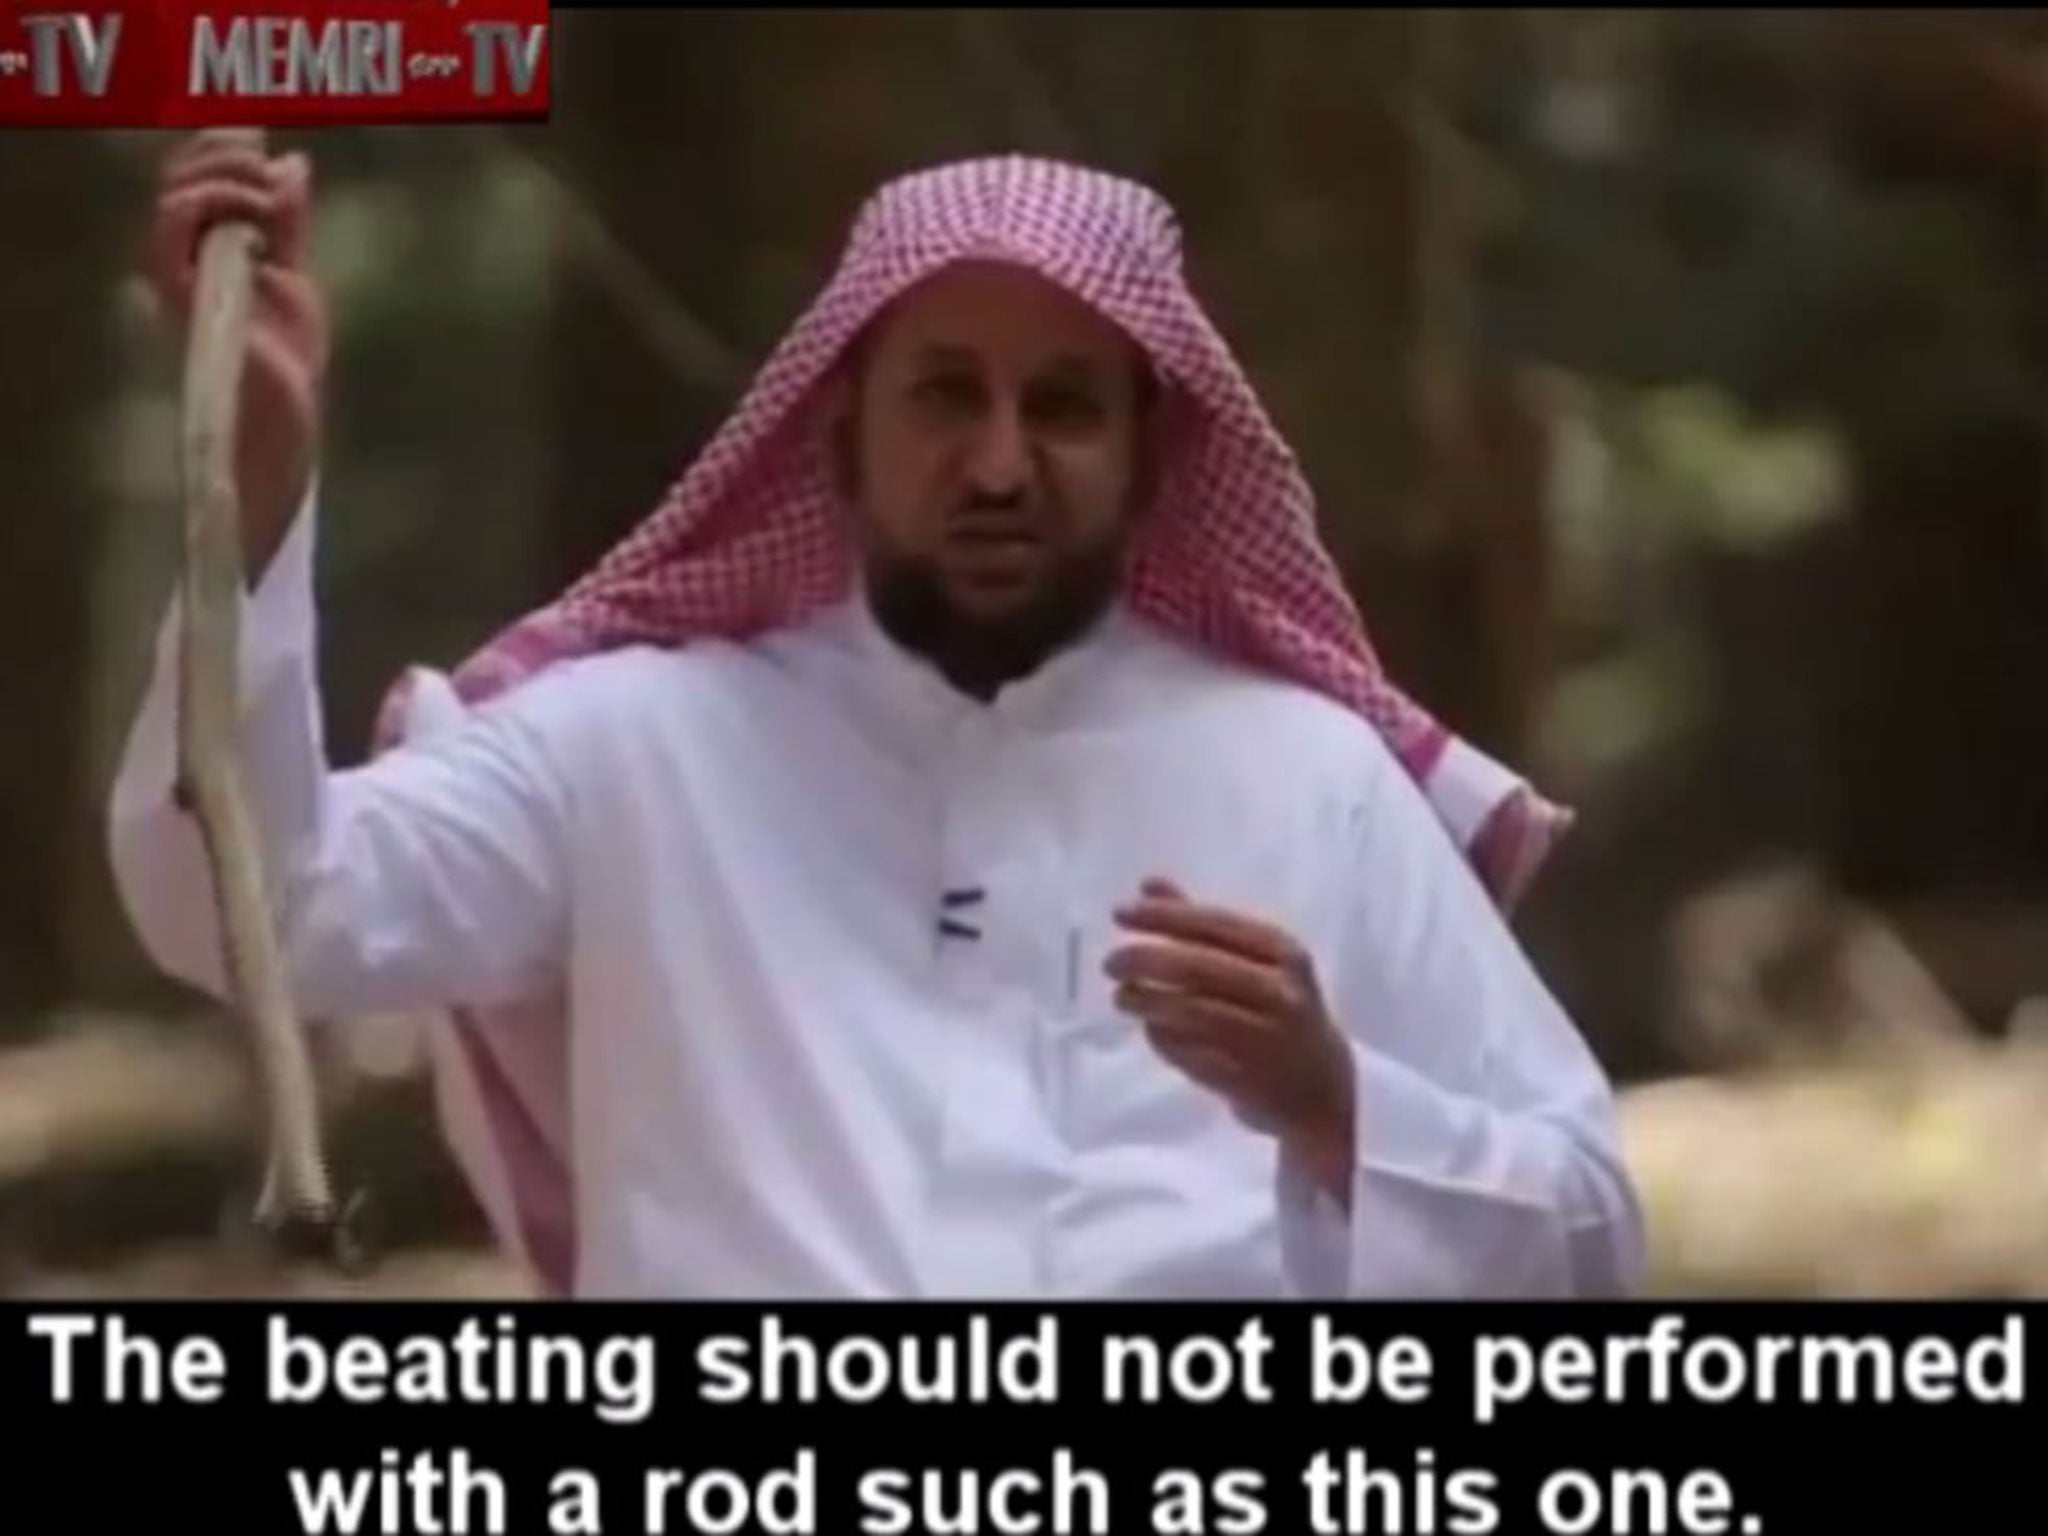 Khaled Al-Saqaby says wives should not be beaten with a rod